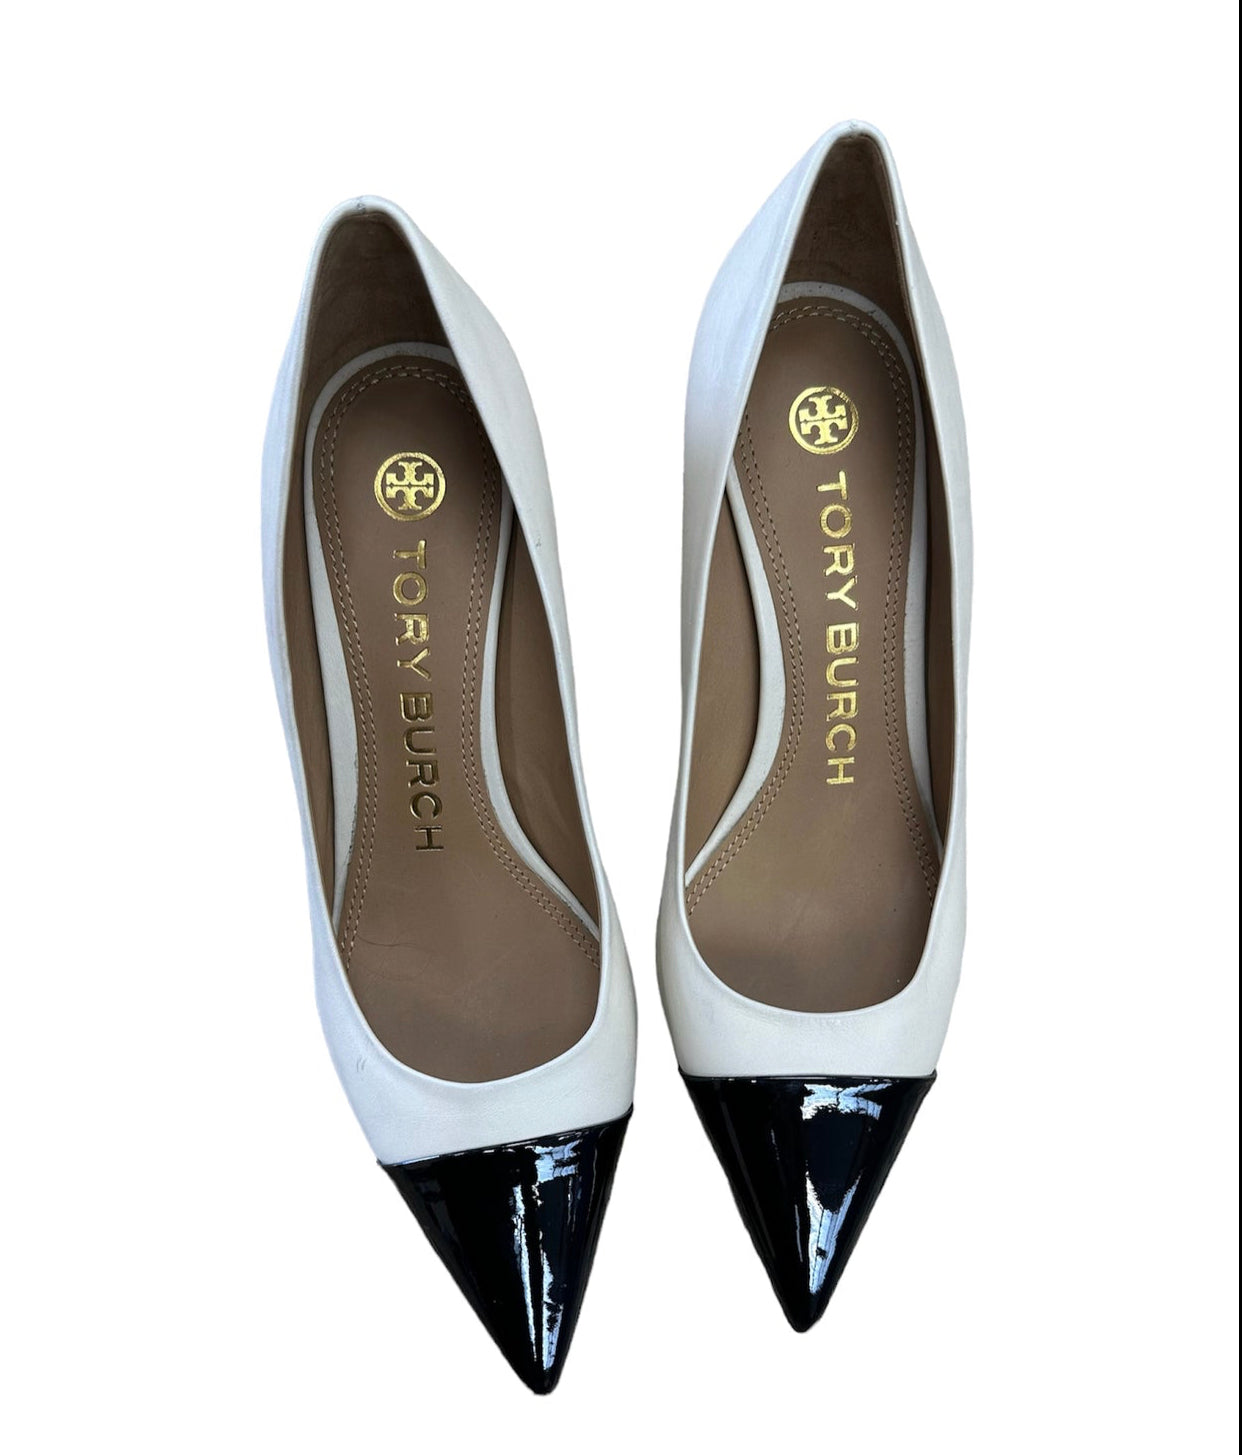 Shoes Heels D Orsay By Tory Burch  Size: 6